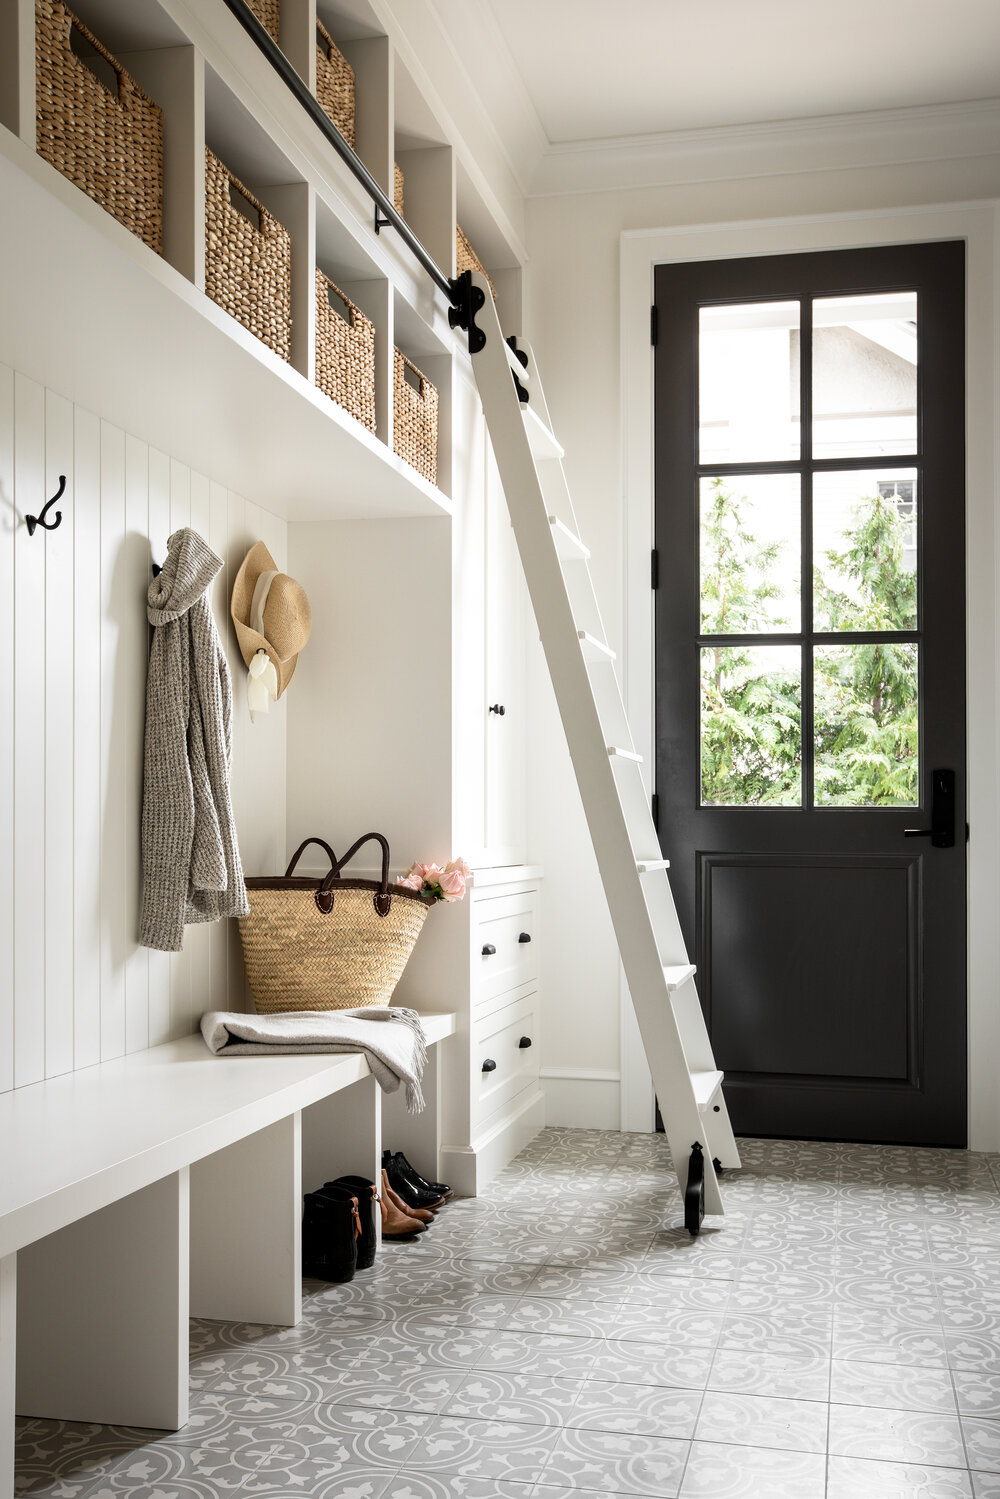 Mud room with built-ins in beautiful French country home with interior design by Jenny Martin Design. #frenchcountryhome #mudroom #interiordesign